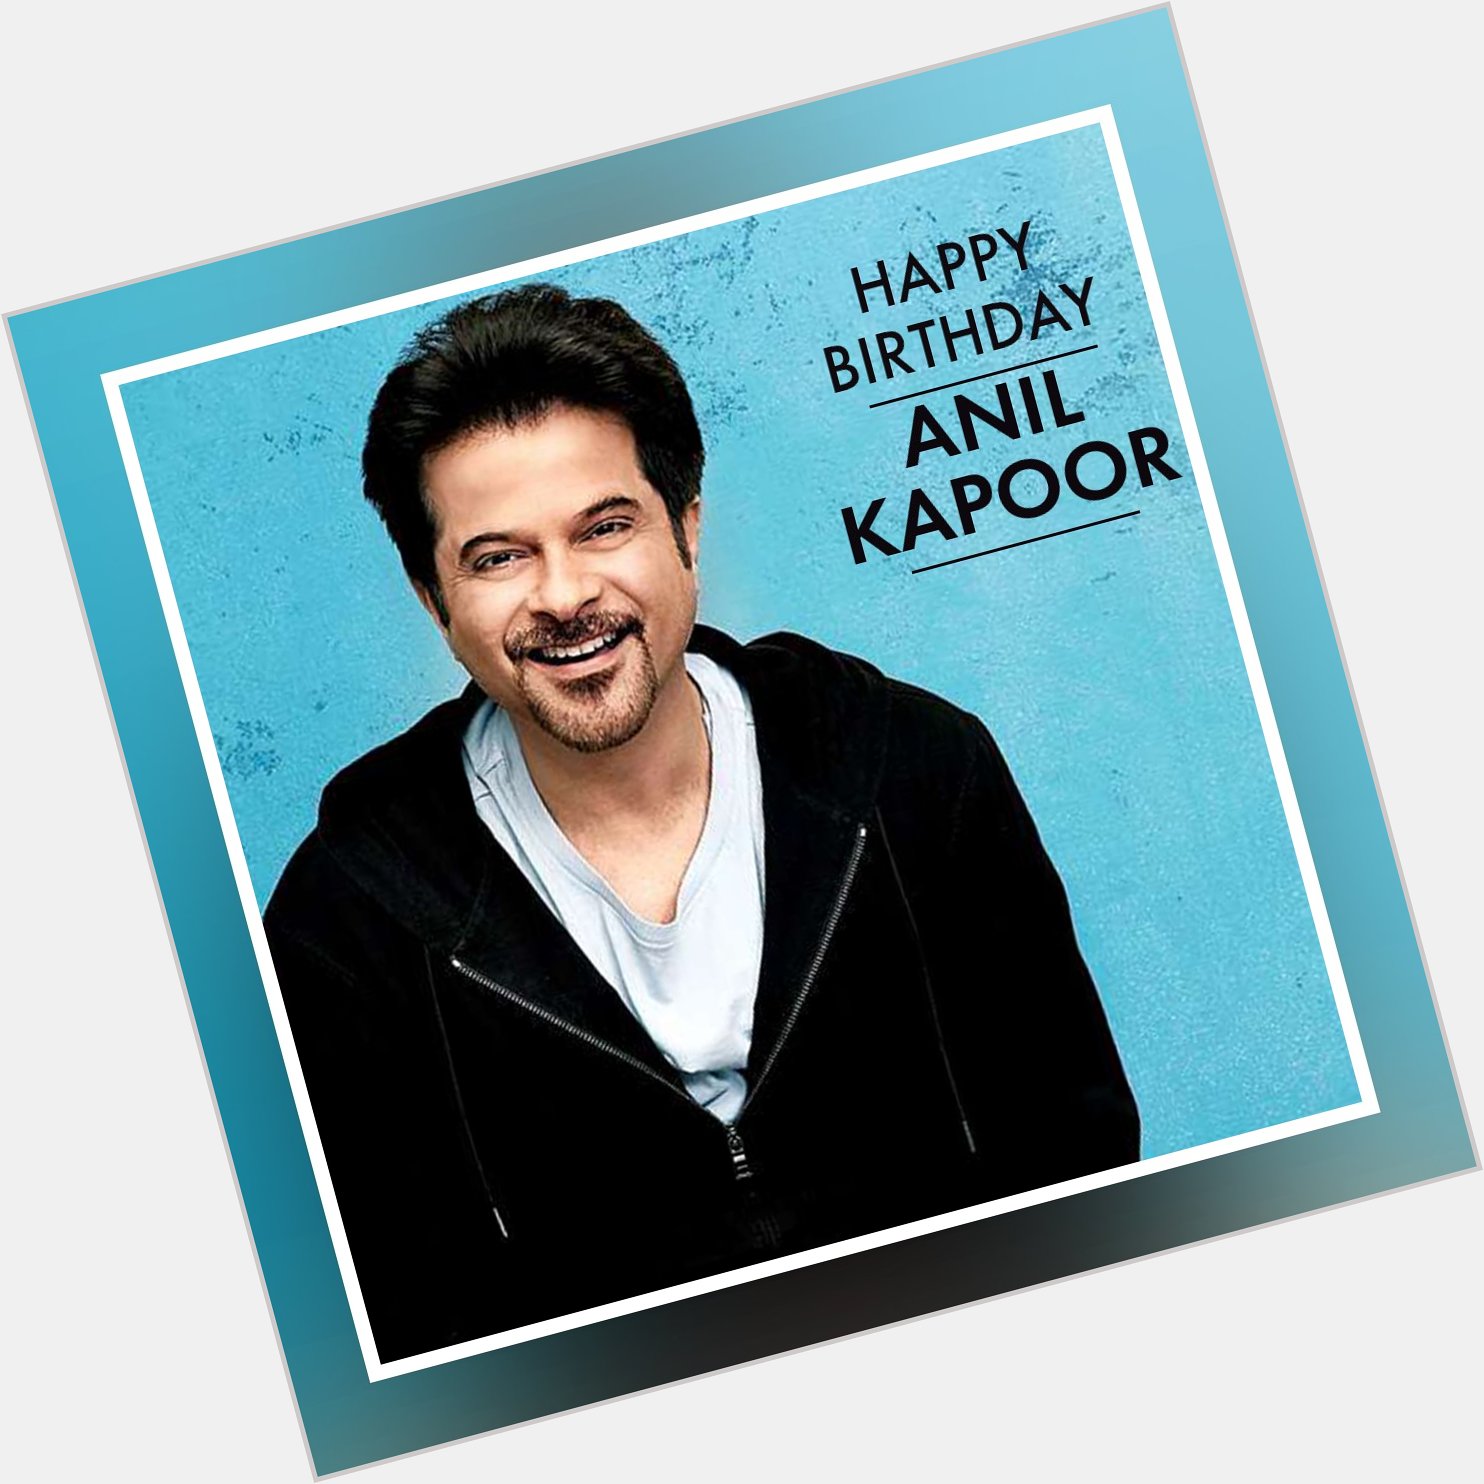 Wish You Very Happy Birthday The Superstar Of Bollywood, Anil Kapoor  